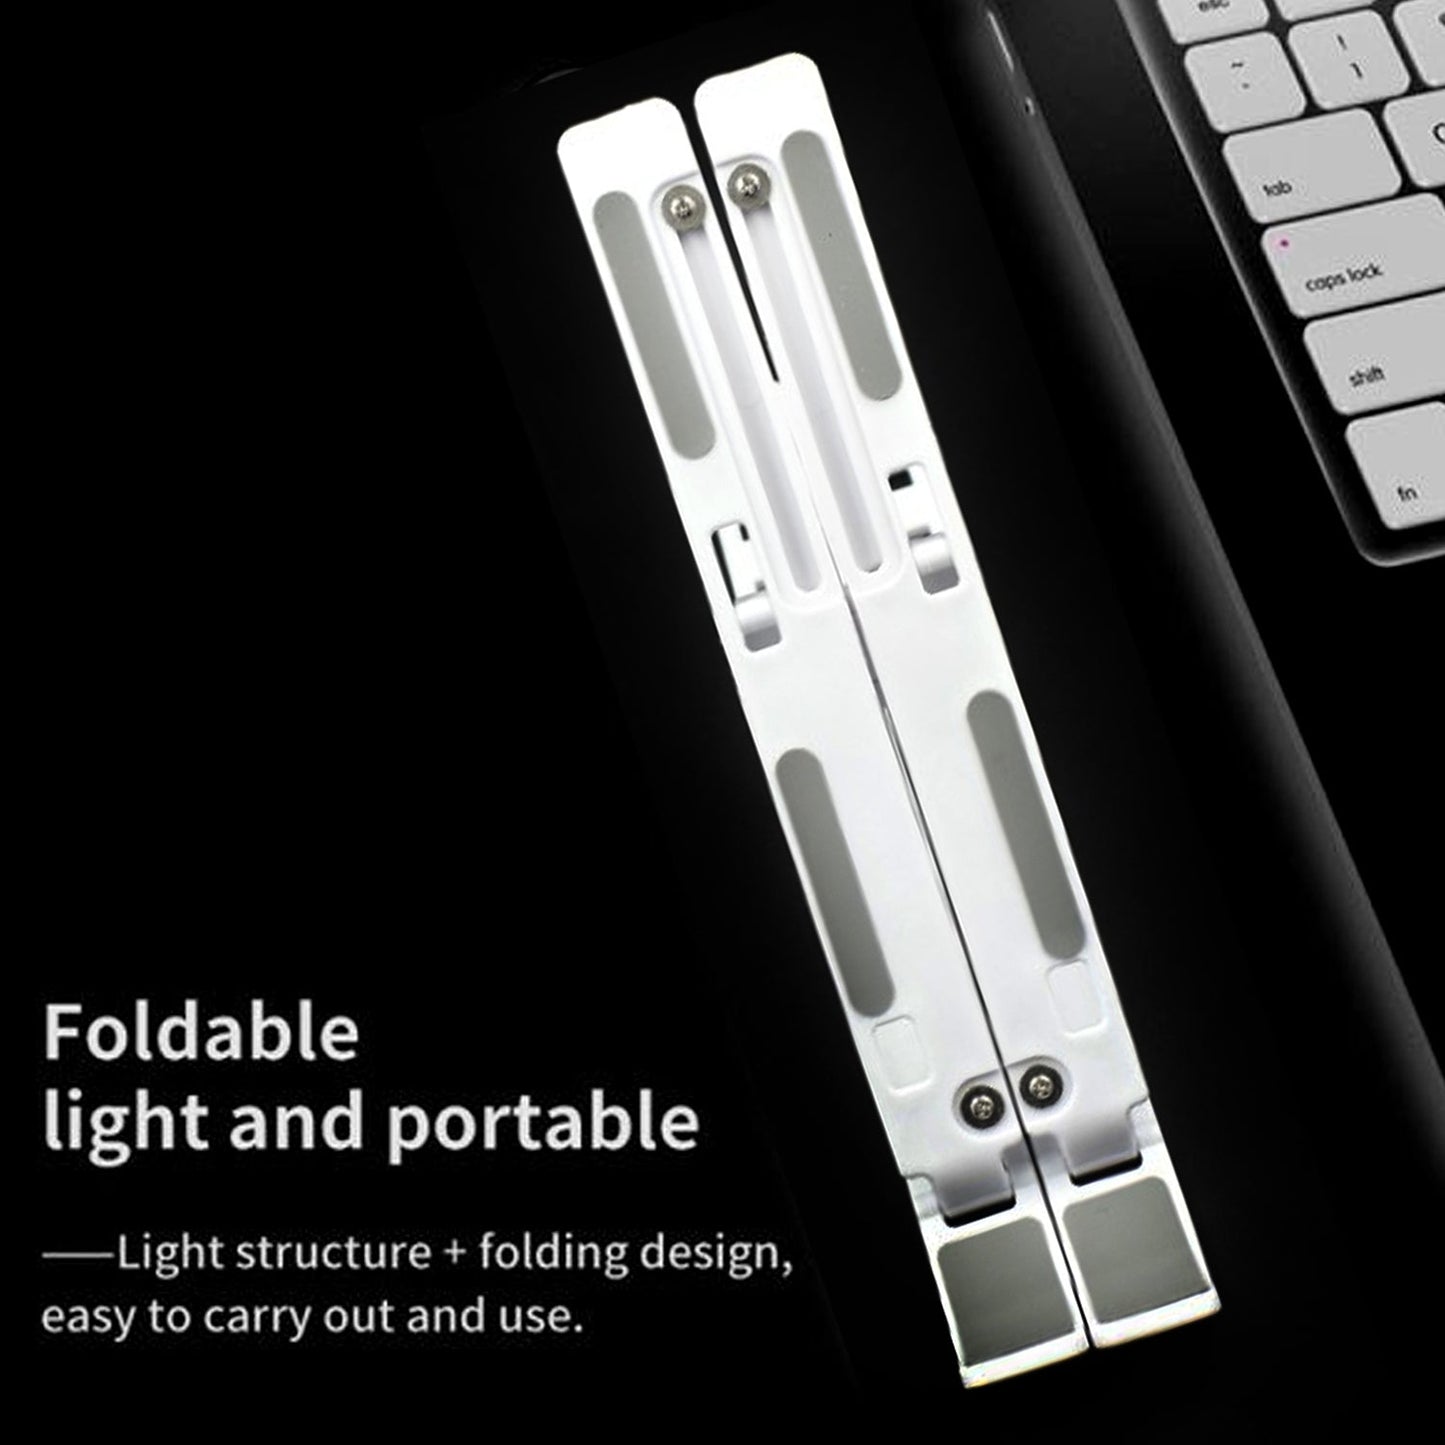 1320 Adjustable Laptop Stand Holder with Built-in Foldable Legs and High Quality Fibre DeoDap